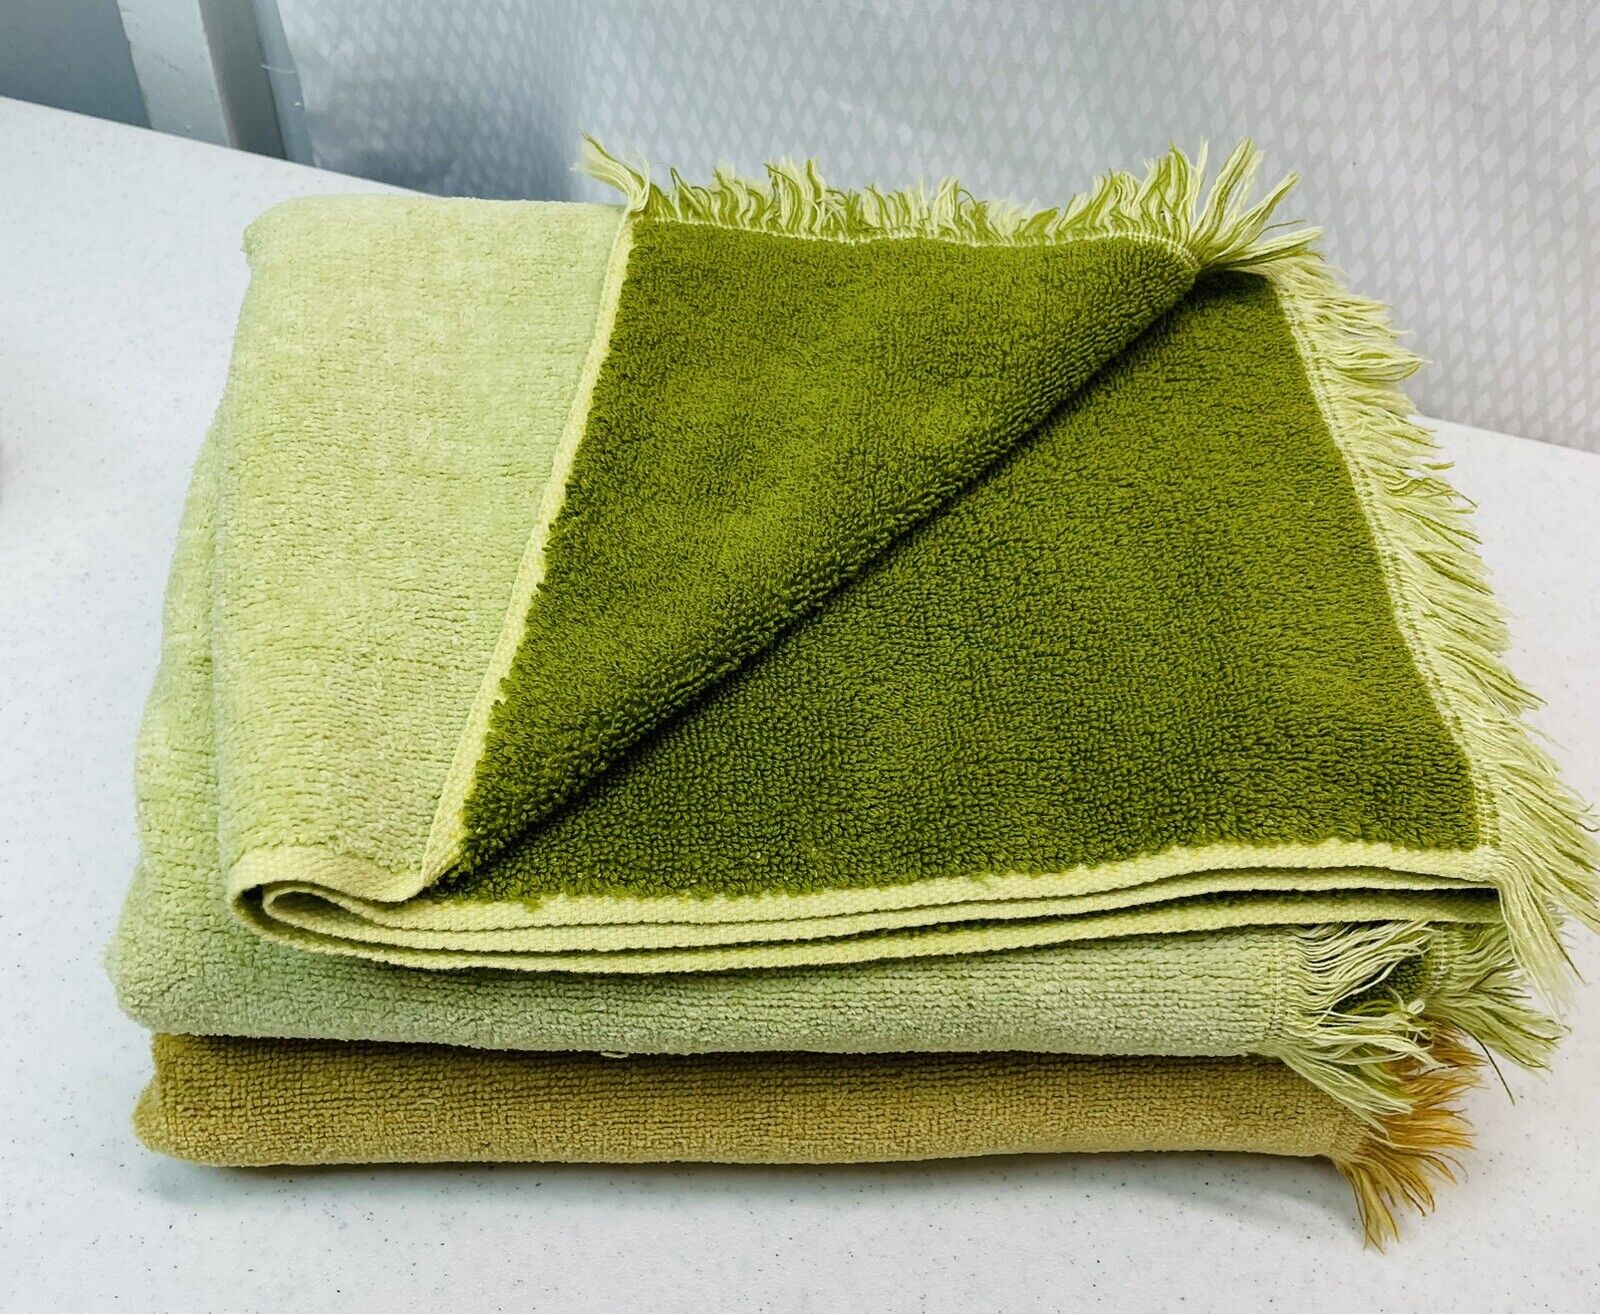 Set if Sears Velvet Touch Towels